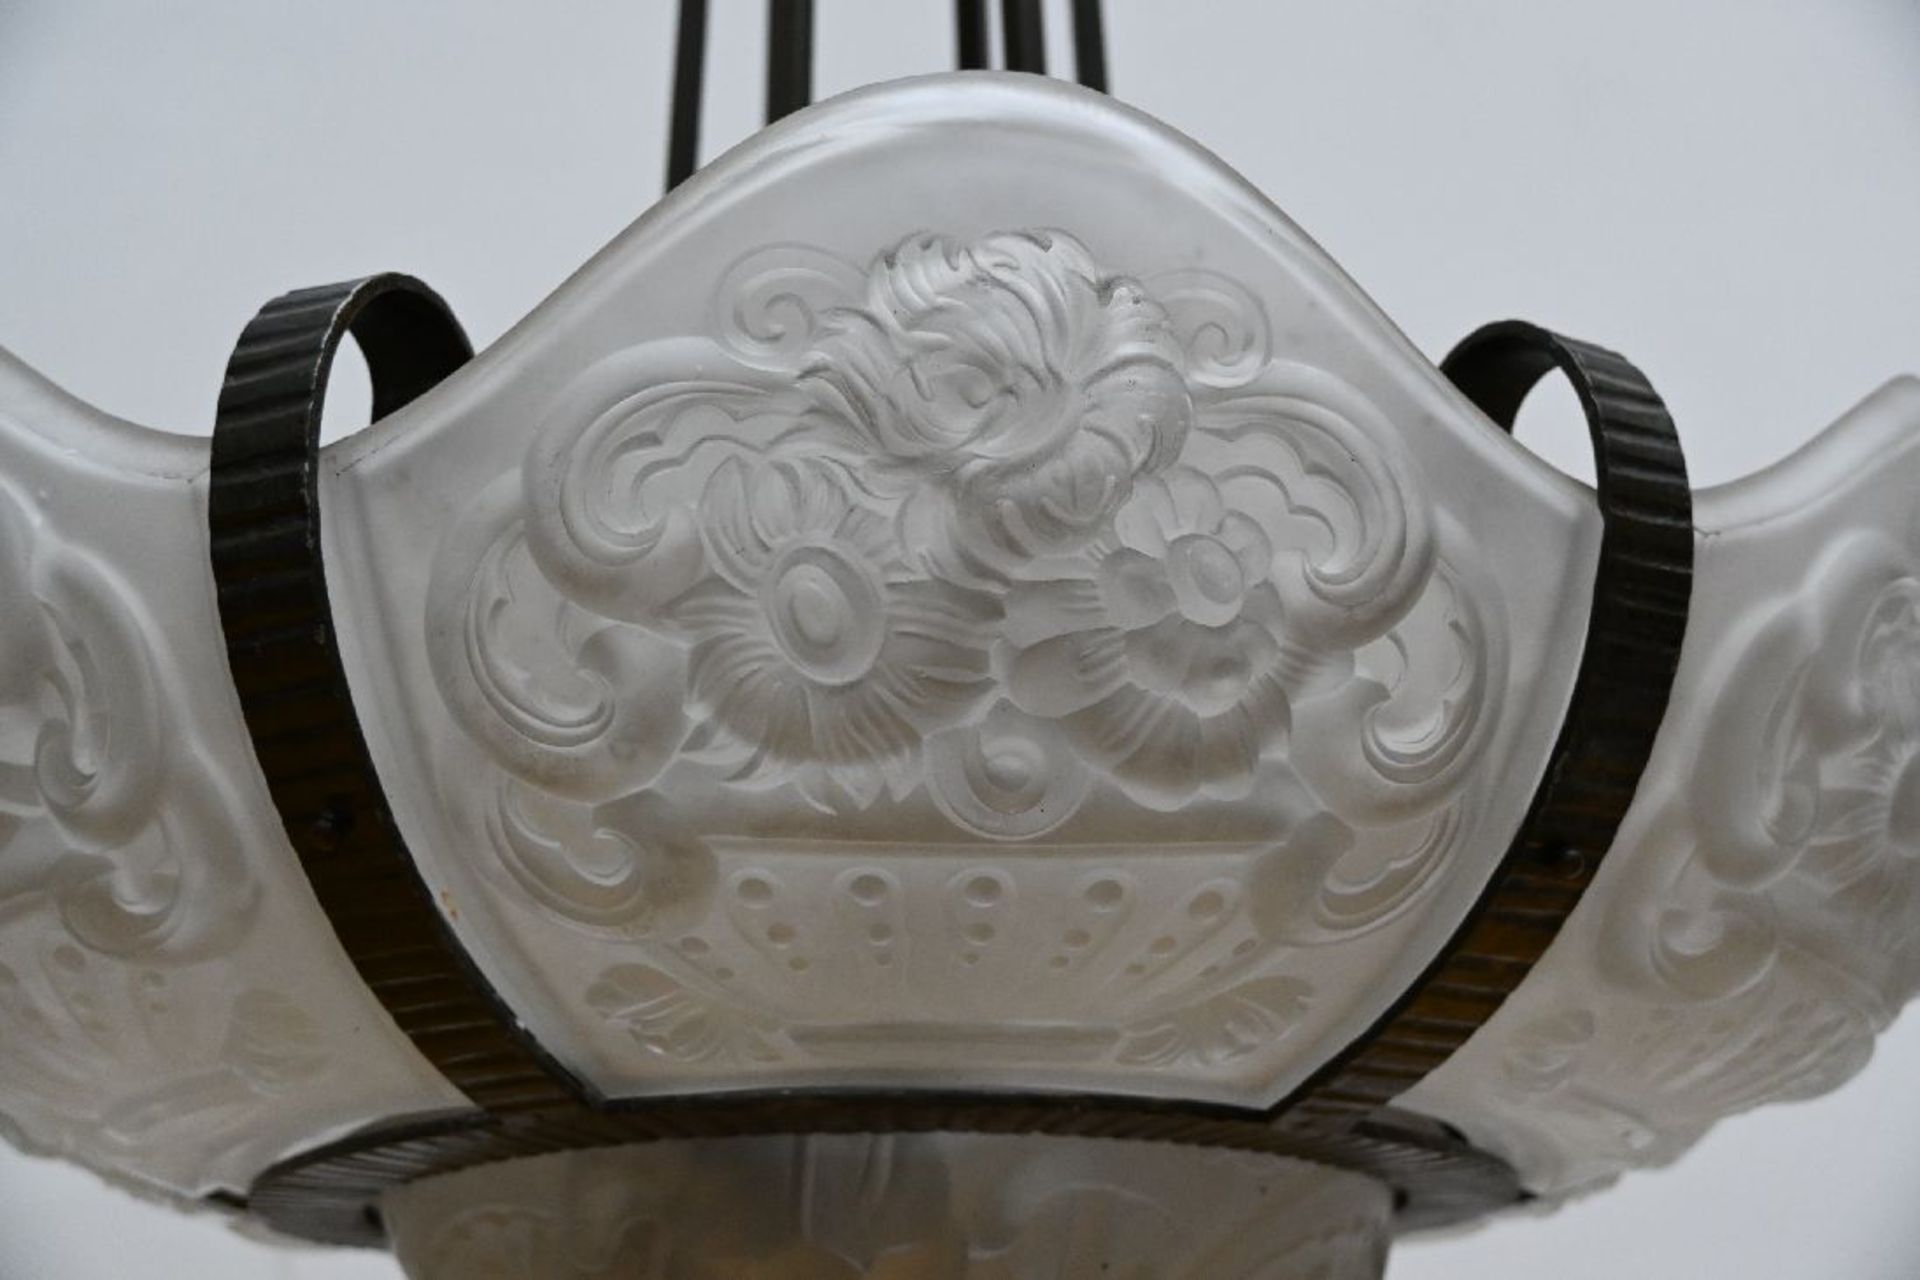 Art deco chandelier in glass and wrought iron - Image 4 of 4